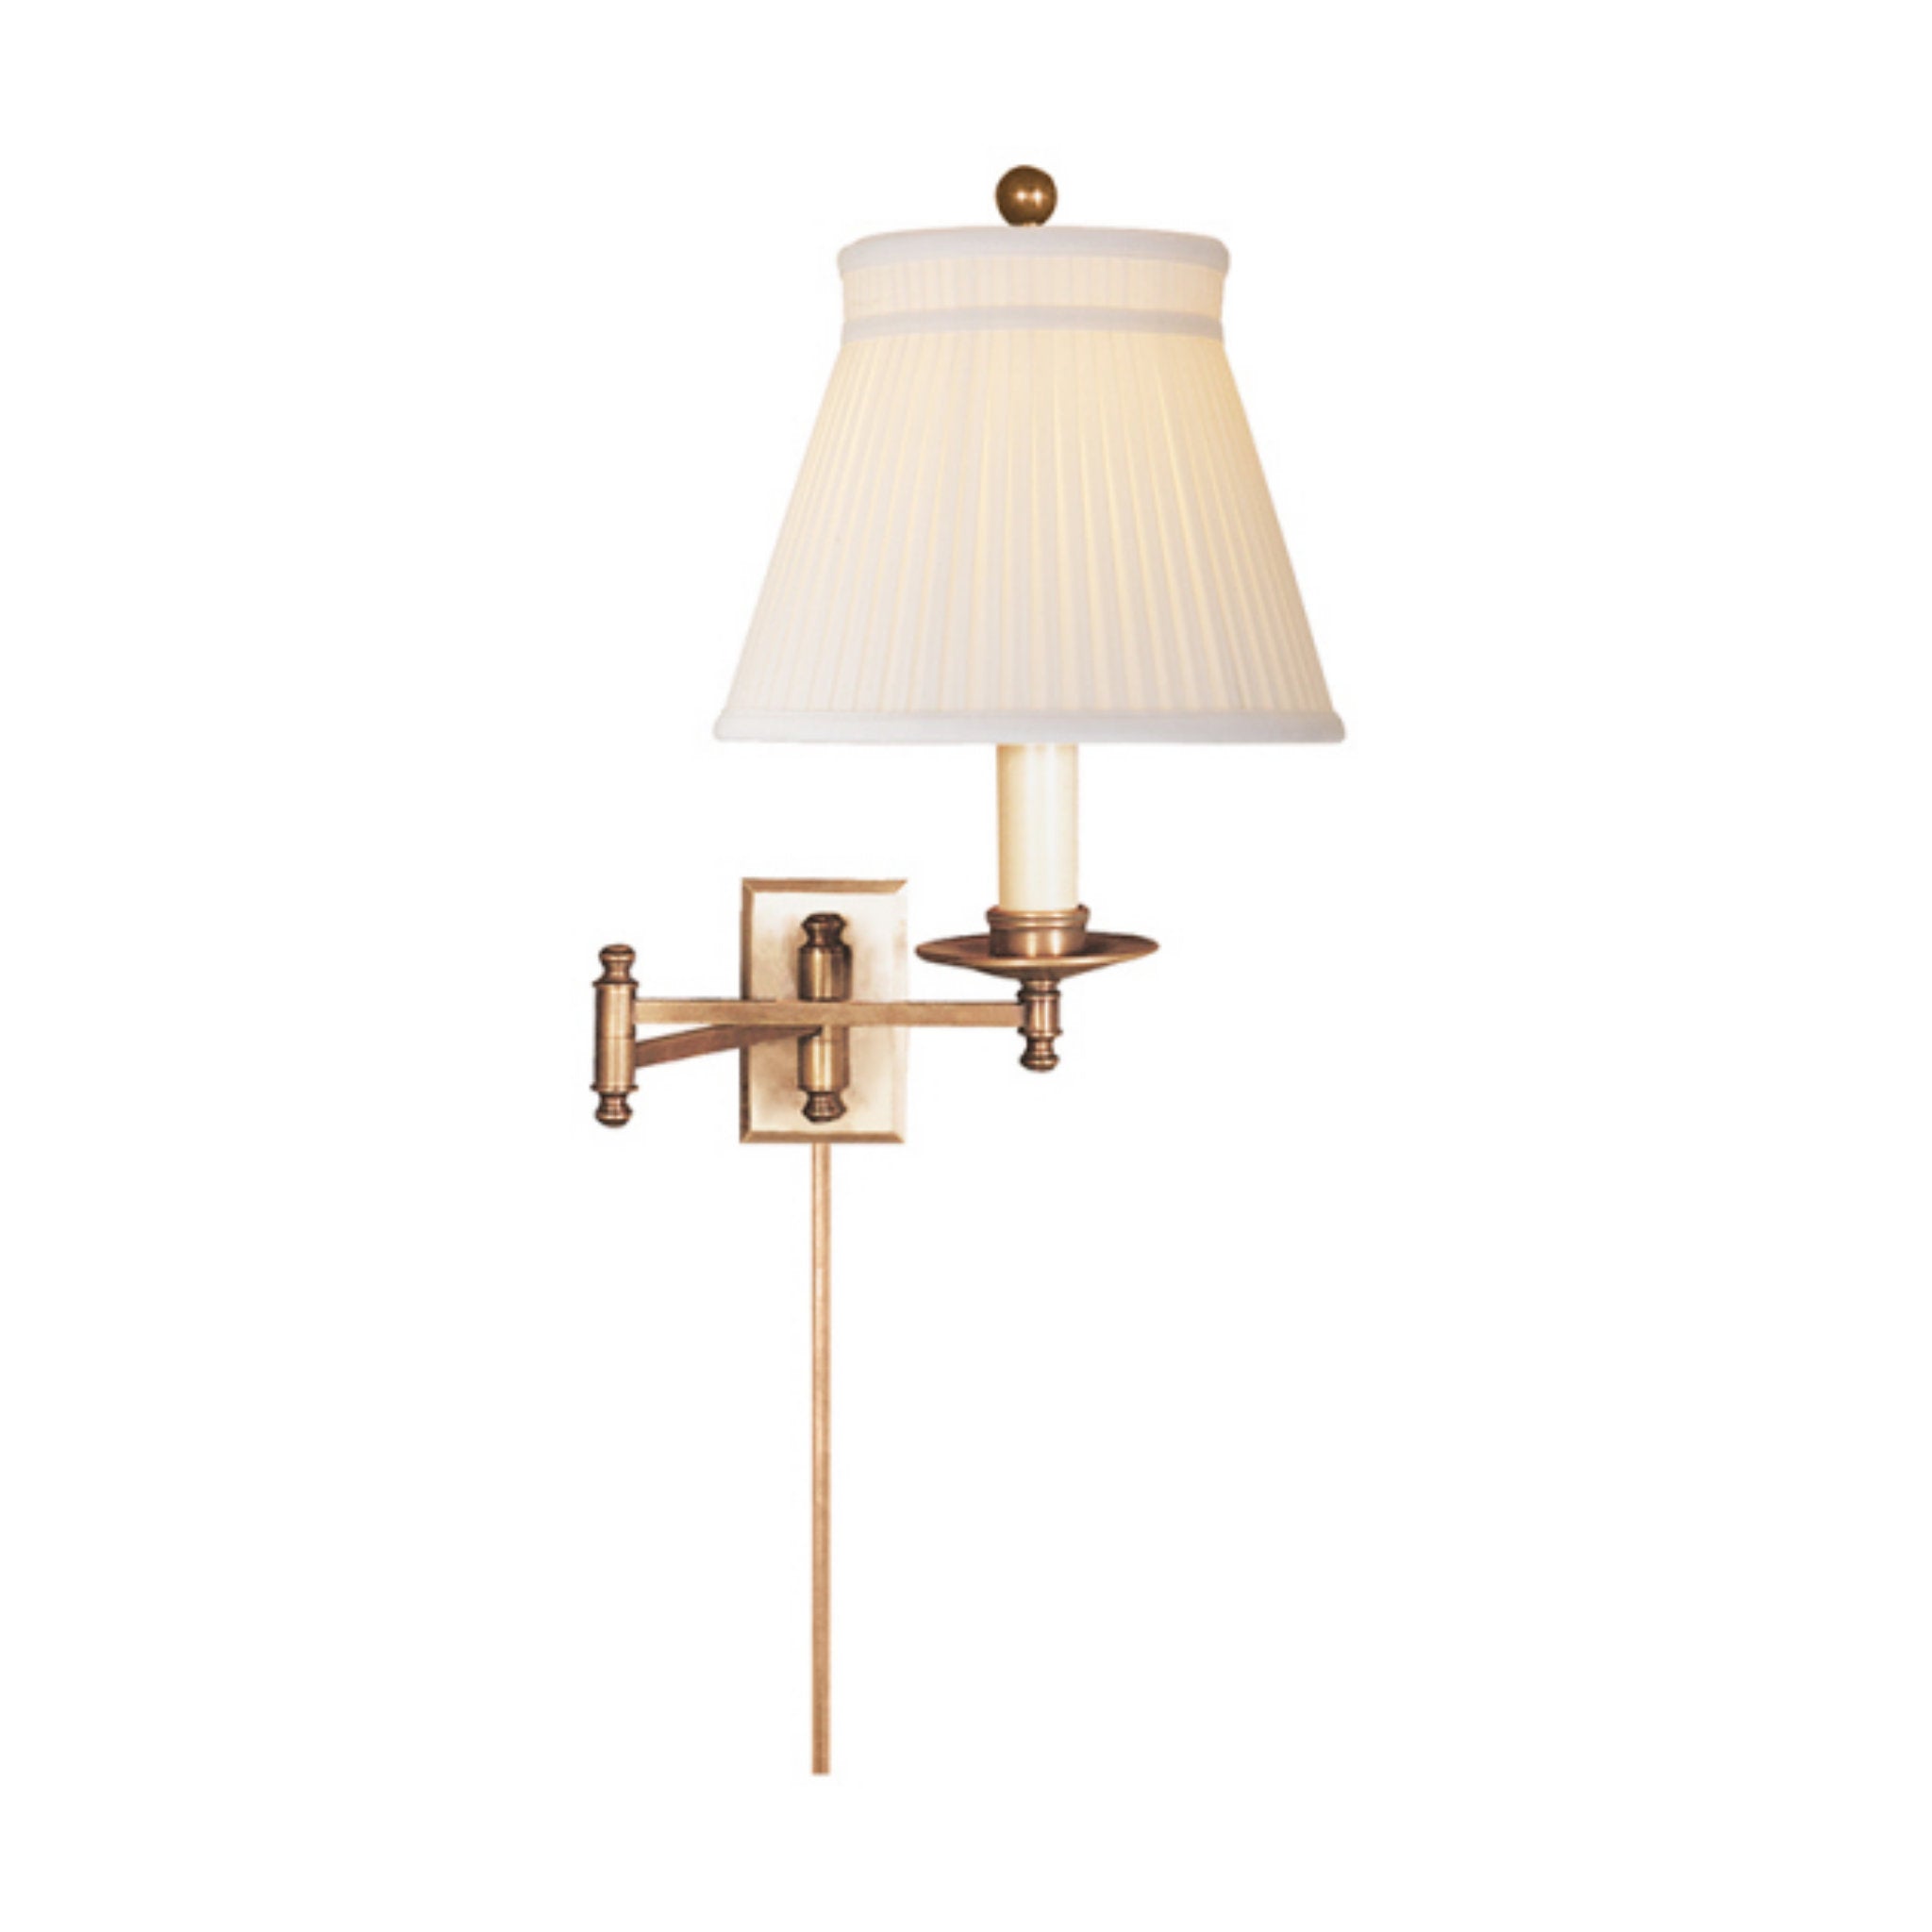 Chapman & Myers Dorchester Swing Arm in Antique-Burnished Brass with Silk Crown Shade